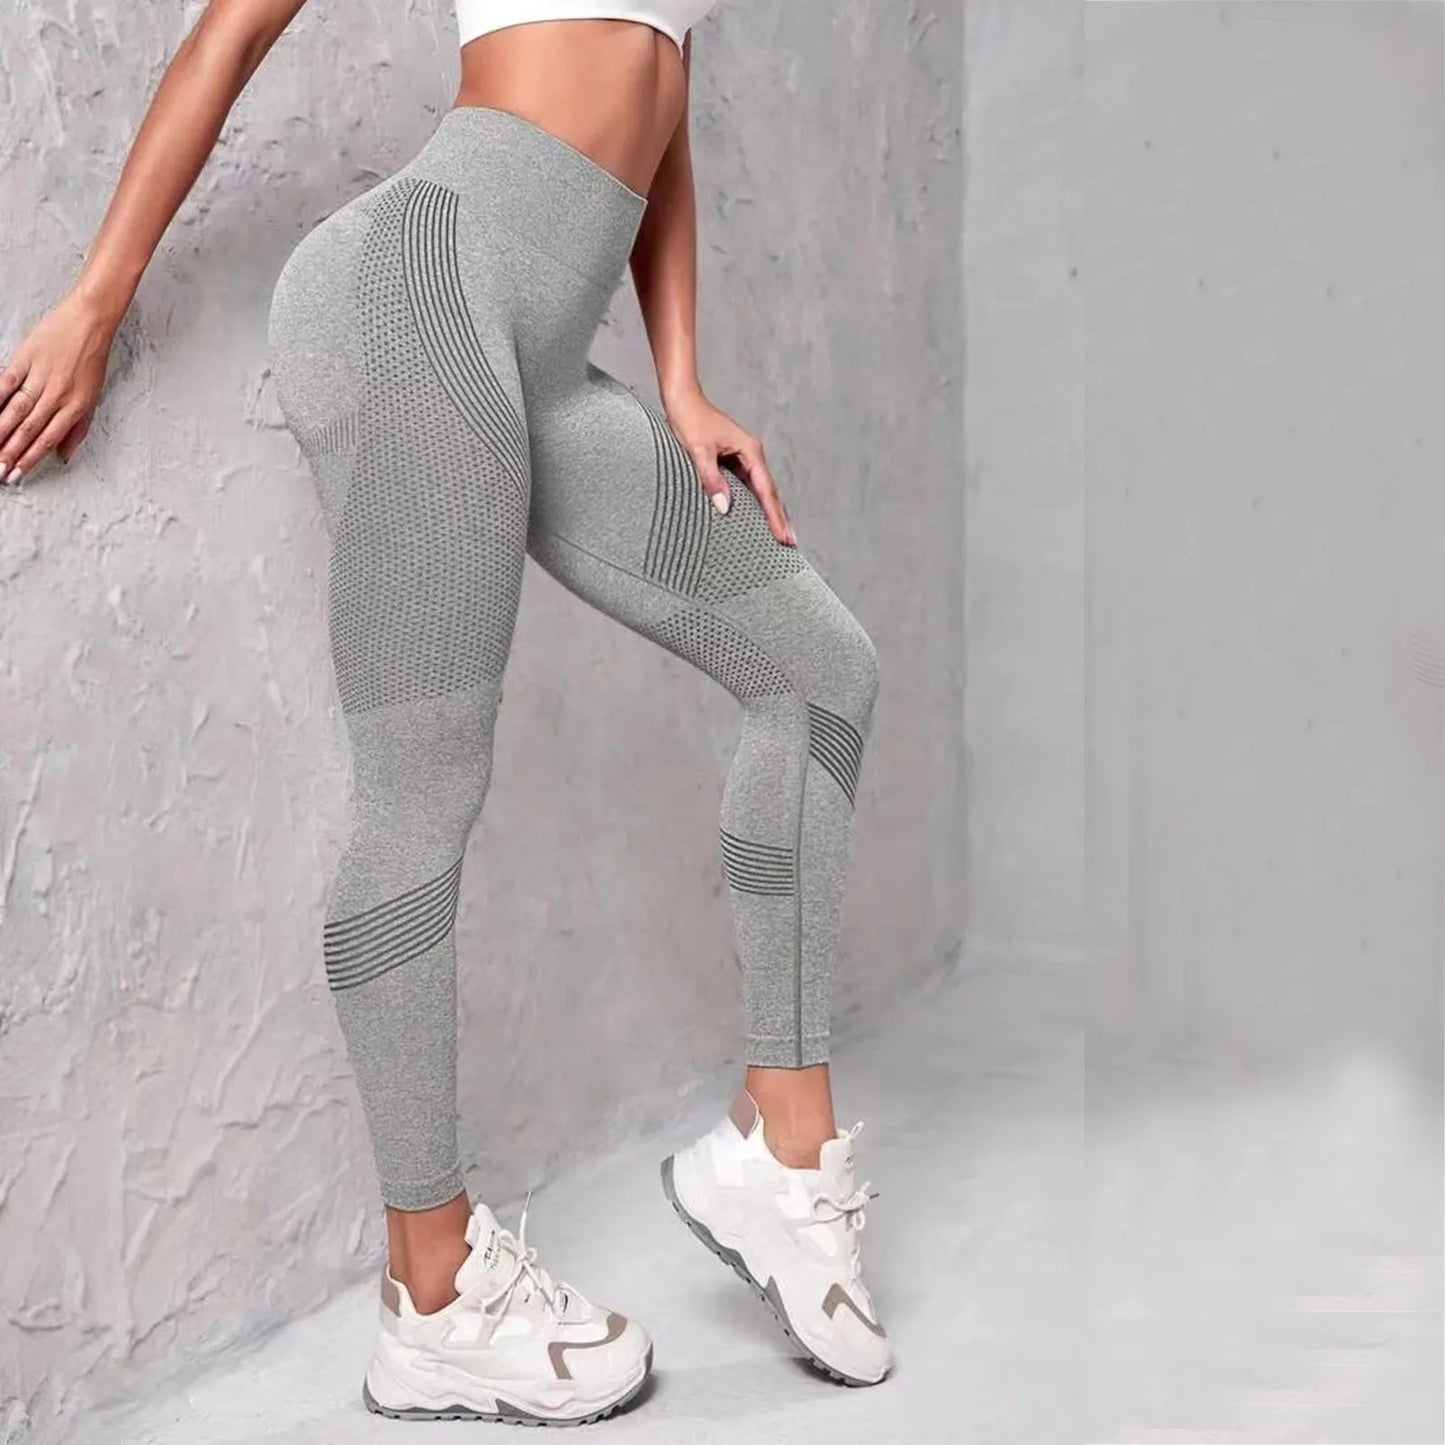 Push Up Sports Pants Legging Female pants Fitness Solid High Waist Sexy Elastic Workout Tights Comfortable Leggings Women